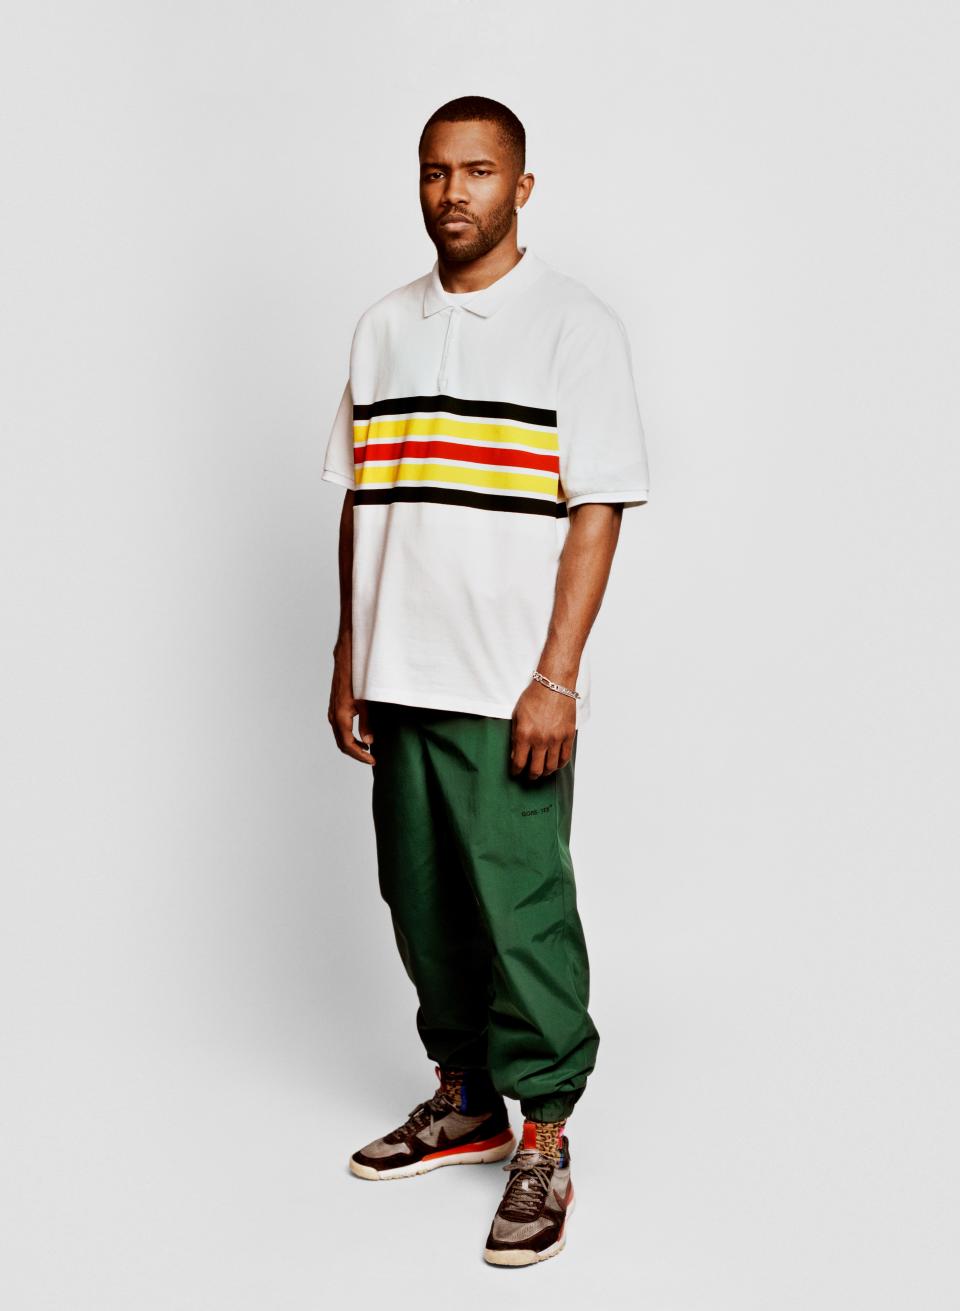 <cite class="credit">Polo shirt, and custom vintage pants, by Gore-Tex / Sneakers, by Tom Sachs x NikeCraft Mars Yard 2.0</cite>